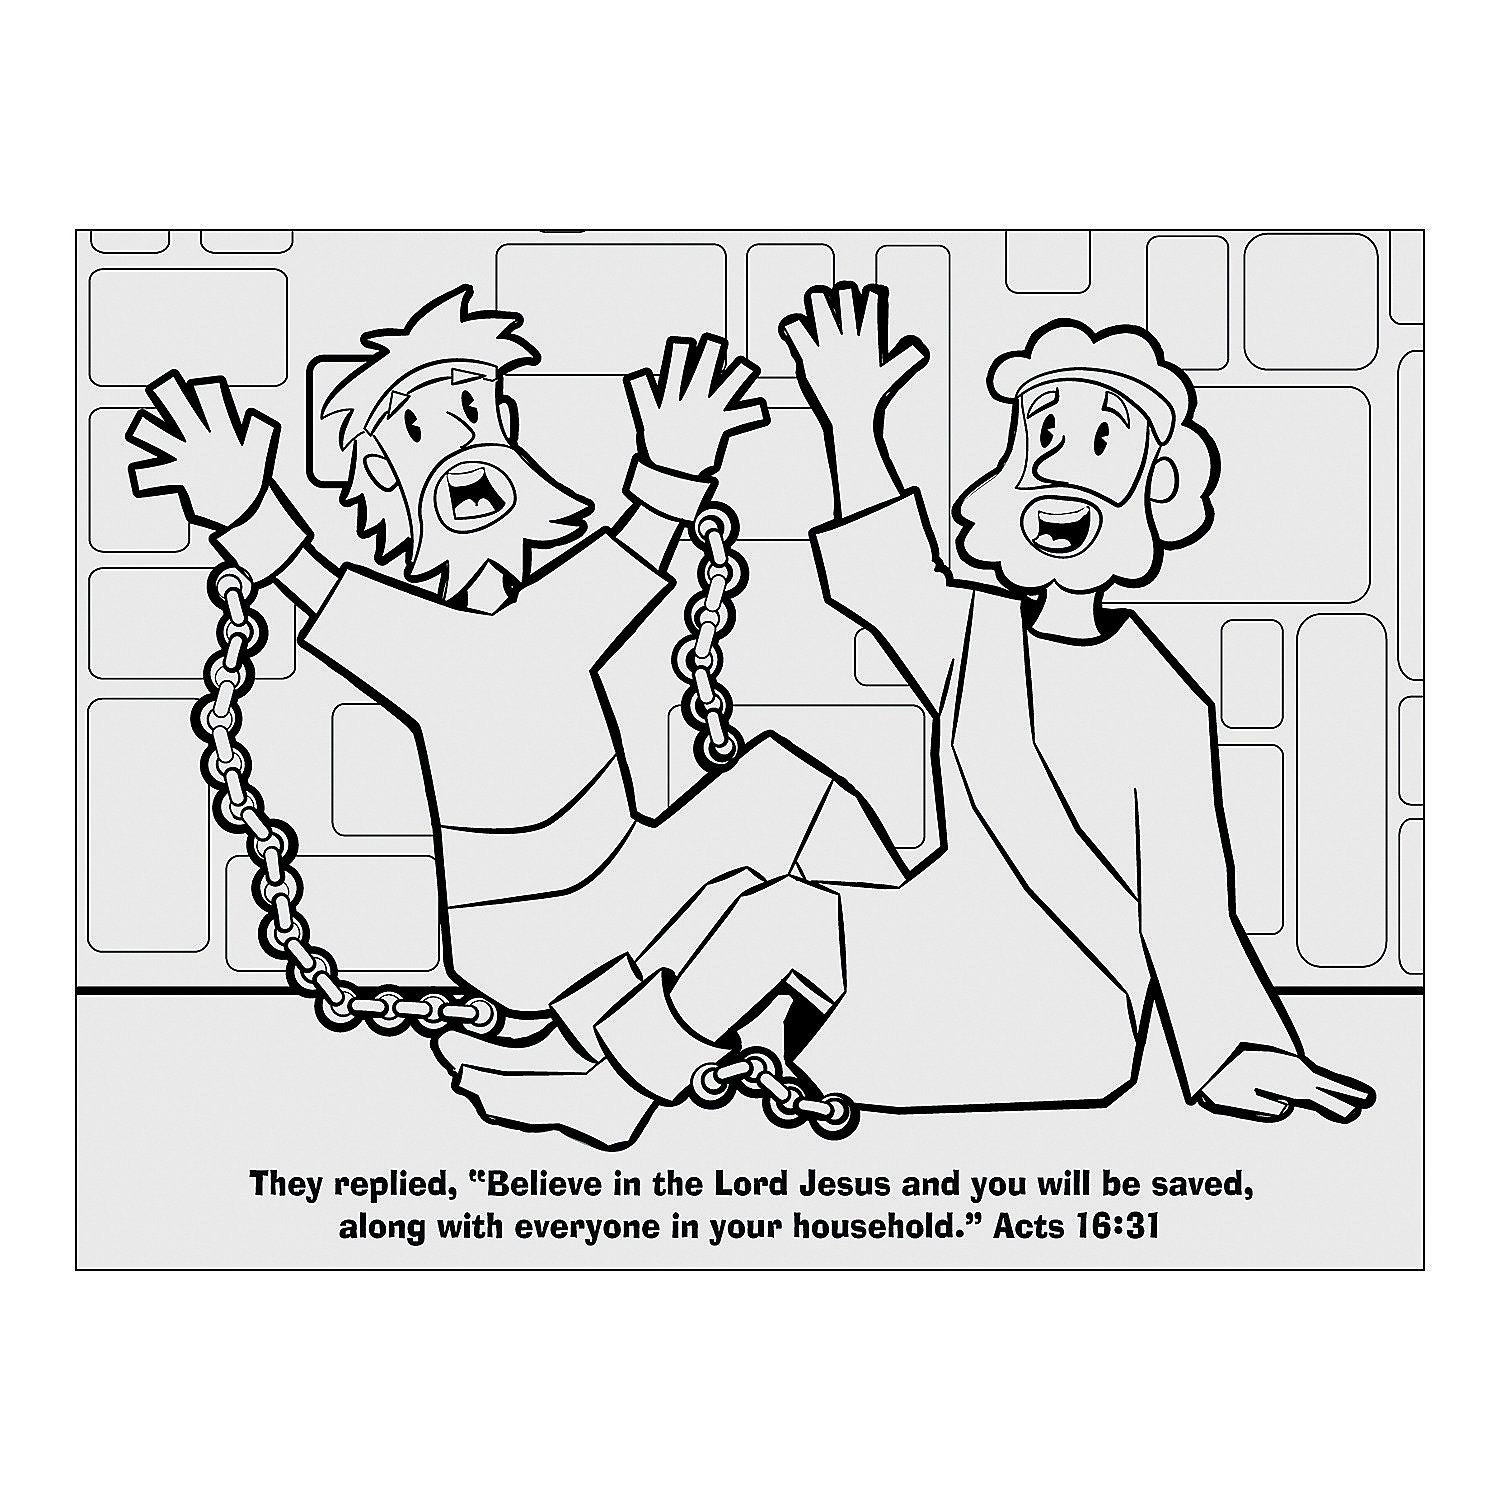 paul and silas in prison coloring sheet - Clip Art Library